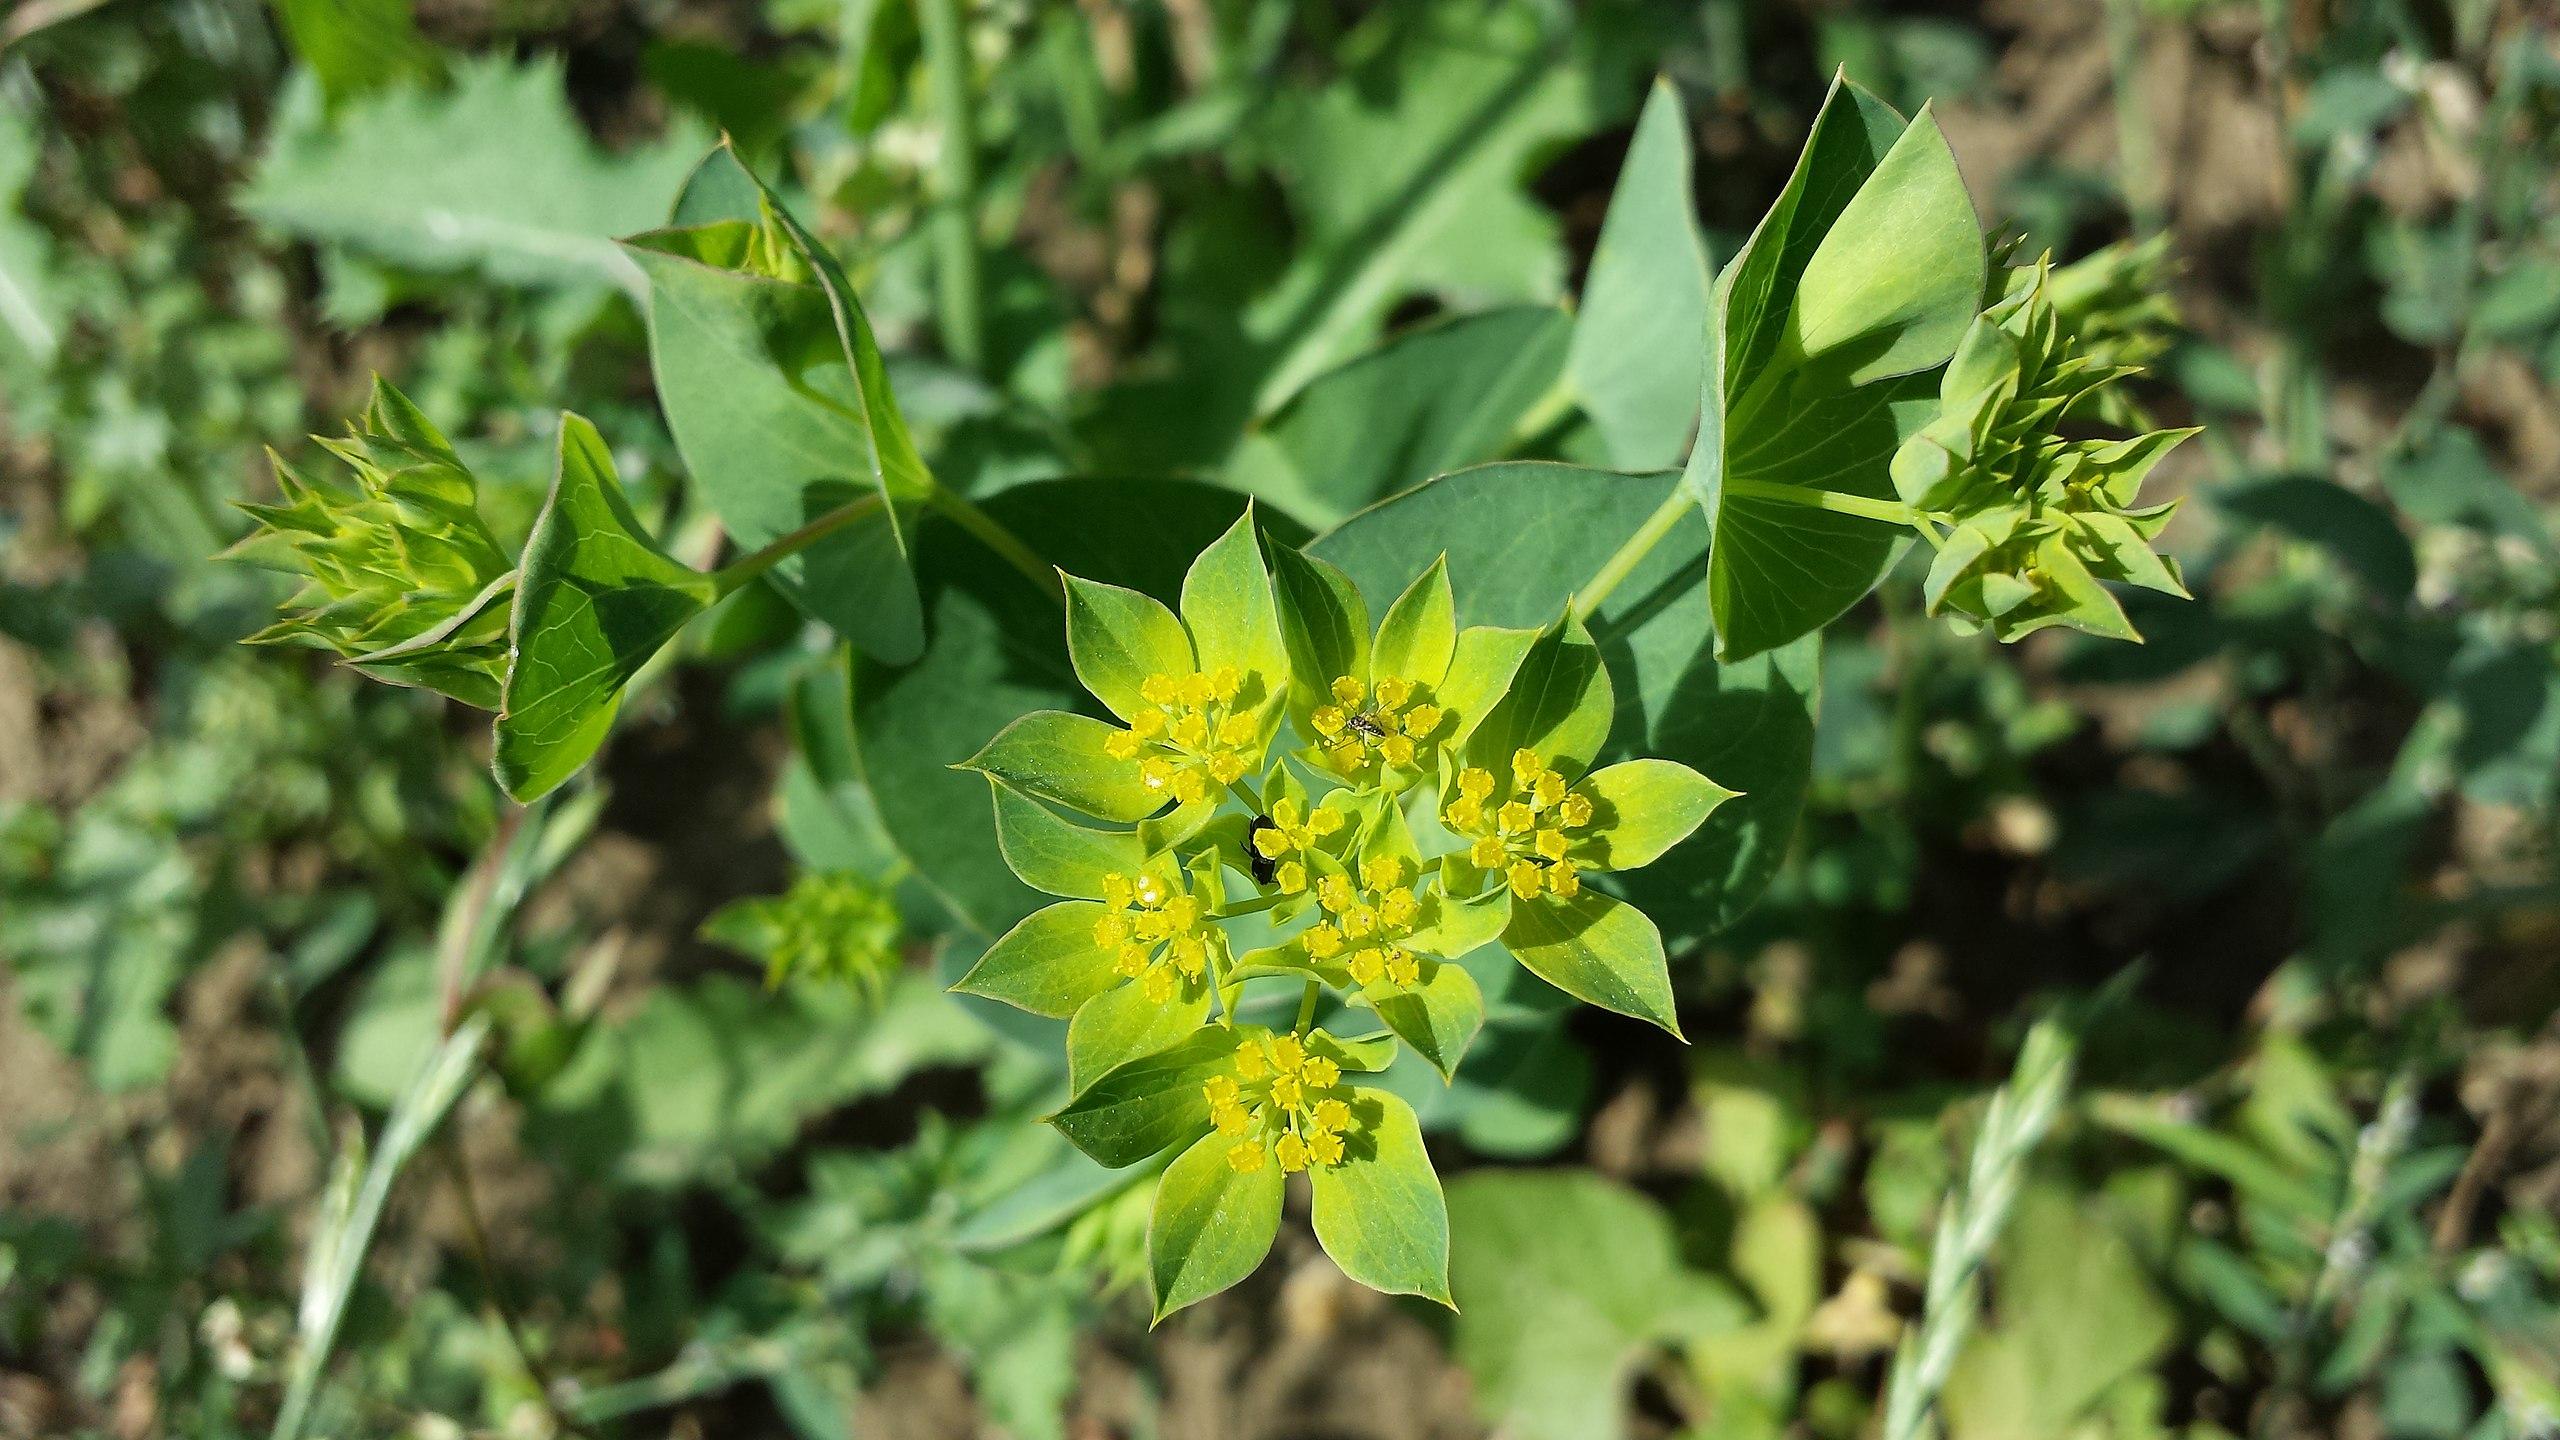 yellow-lime flowers with light-green stems and green leaves